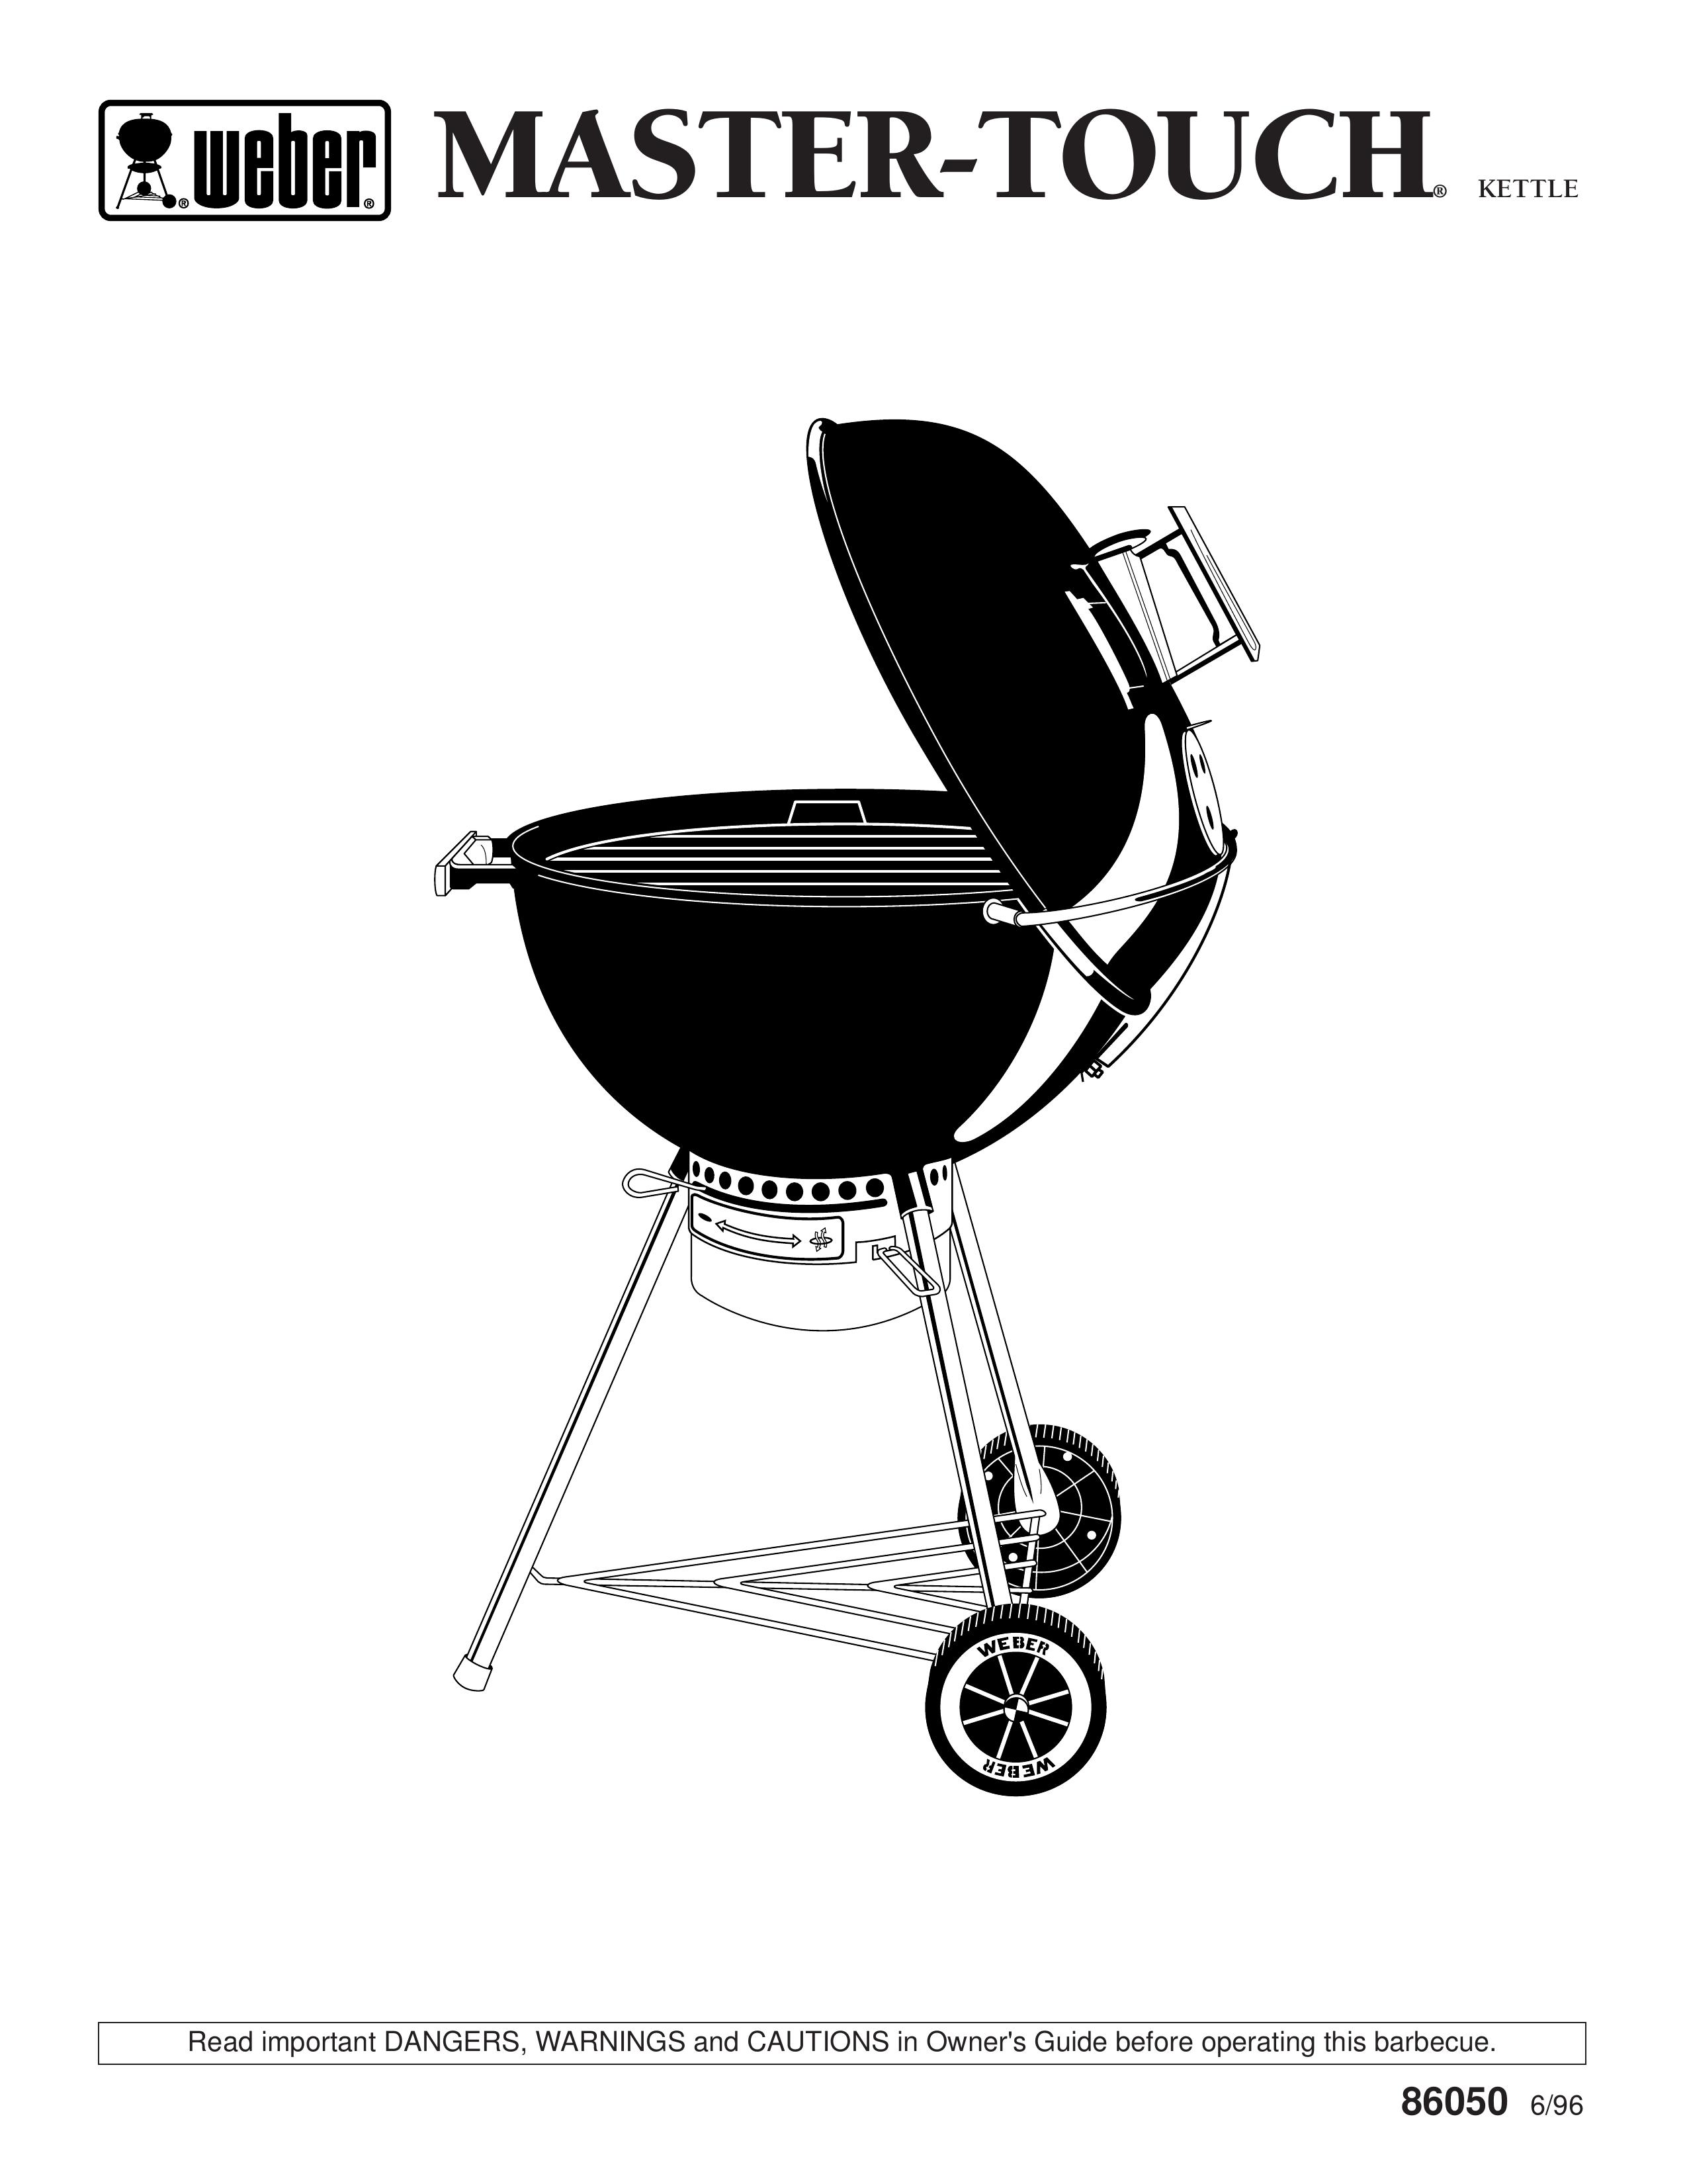 Weber master-touch kettle Charcoal Grill User Manual